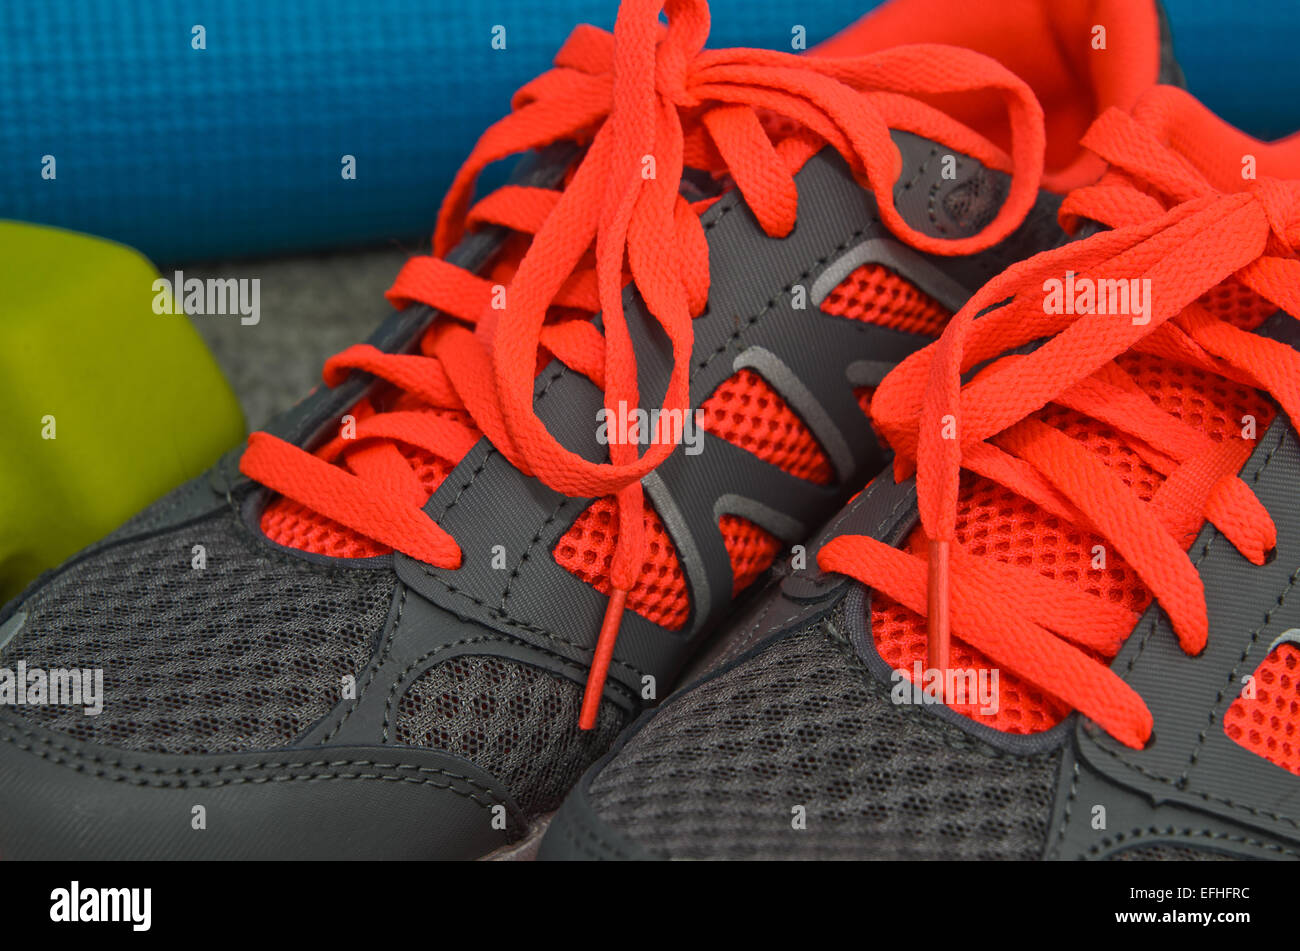 Bright orange and gray sport shoes Stock Photo - Alamy